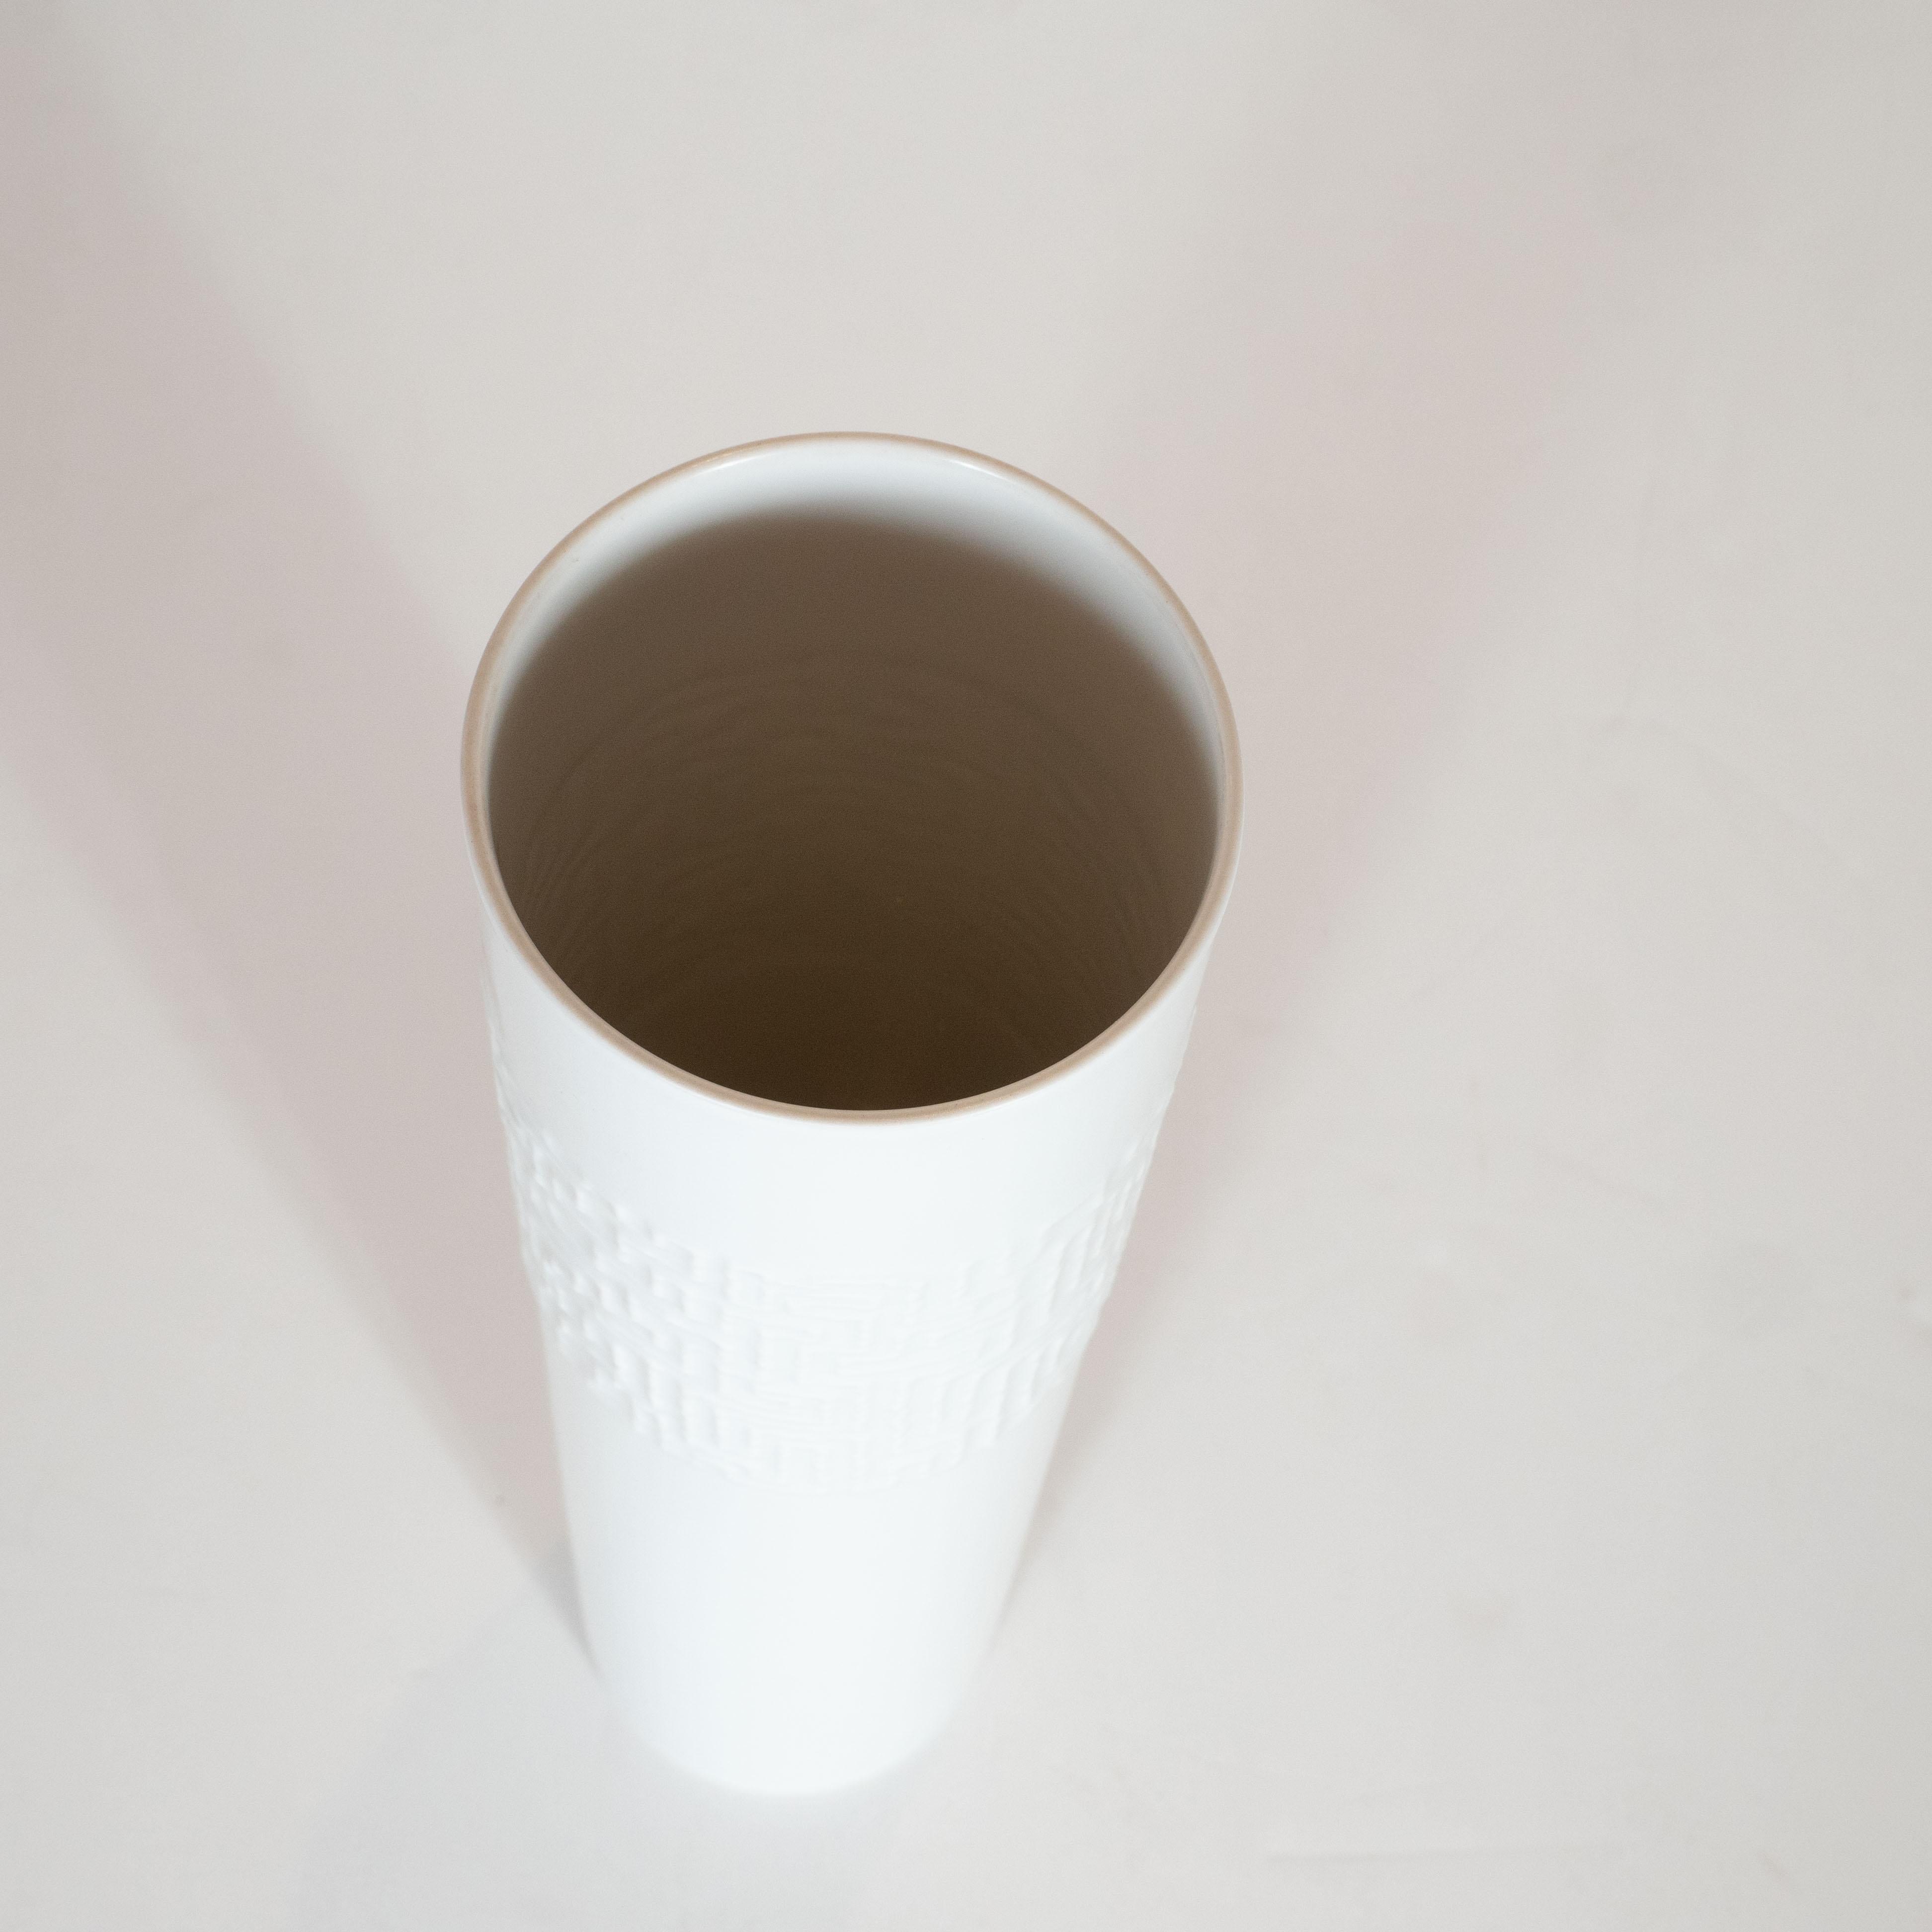 German White Ceramic Cylindrical Vase with Raised Brutalist Design by Rosenthal